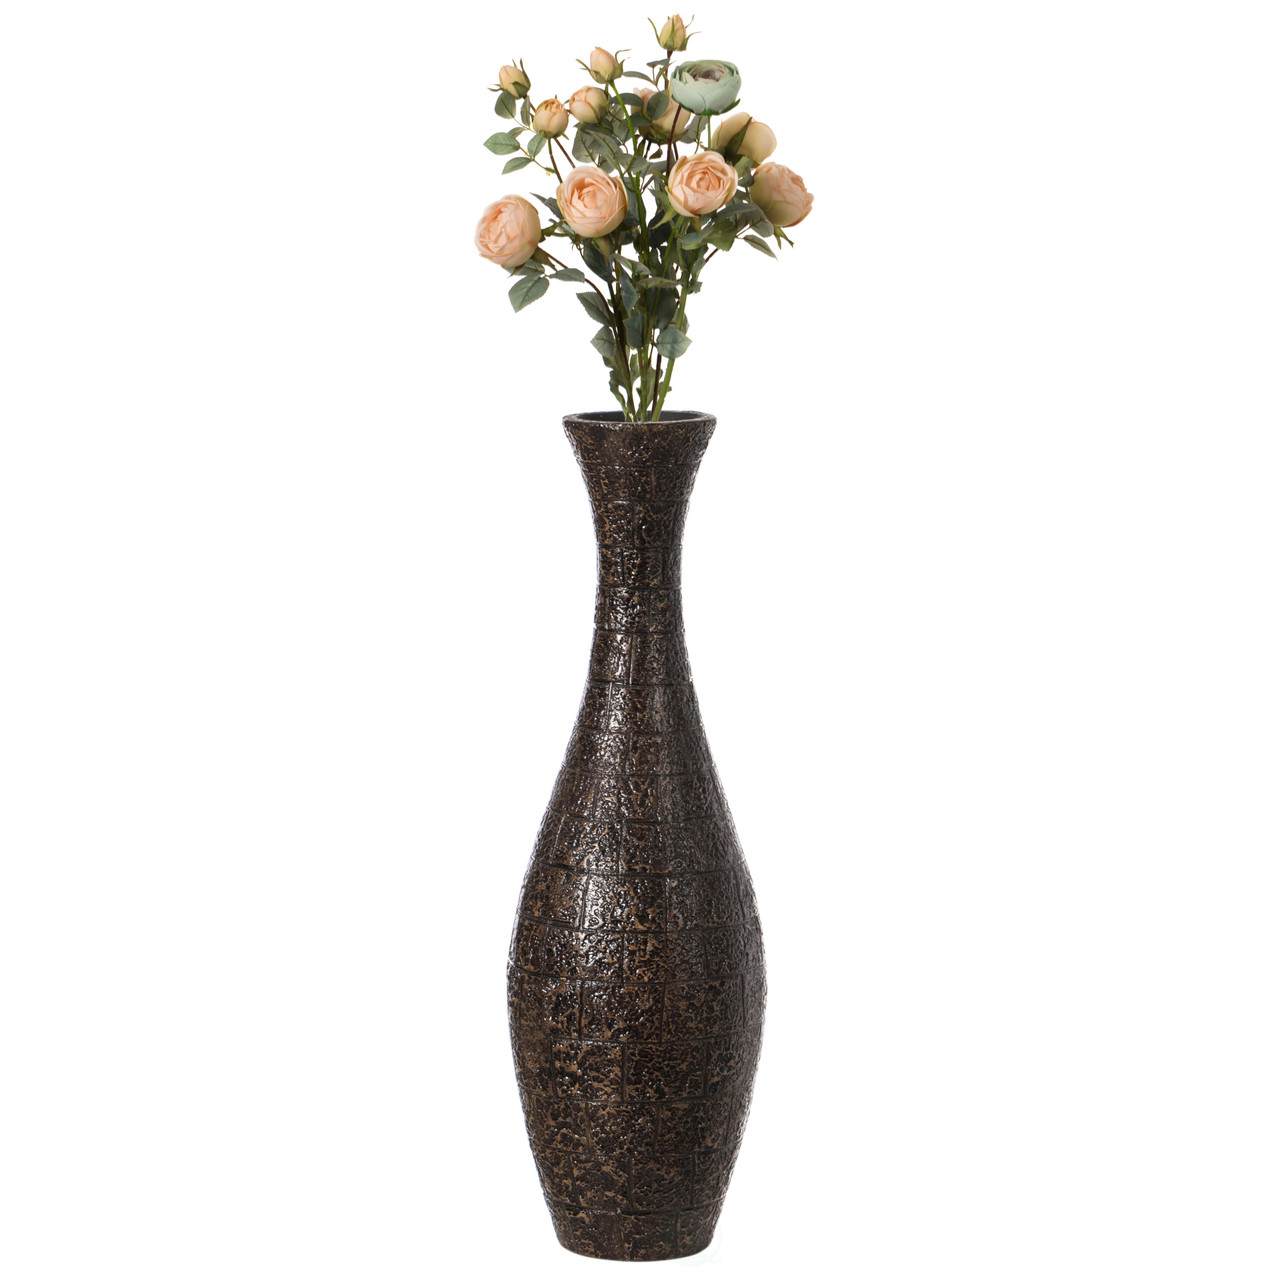 Tall Metal Floor Flower Planter Holder with Stand, Modern Decorative Floor Flower  Holder, Perfect for Your Entryway, Living Room, or Dining Room Decor -  Quickway Imports Inc